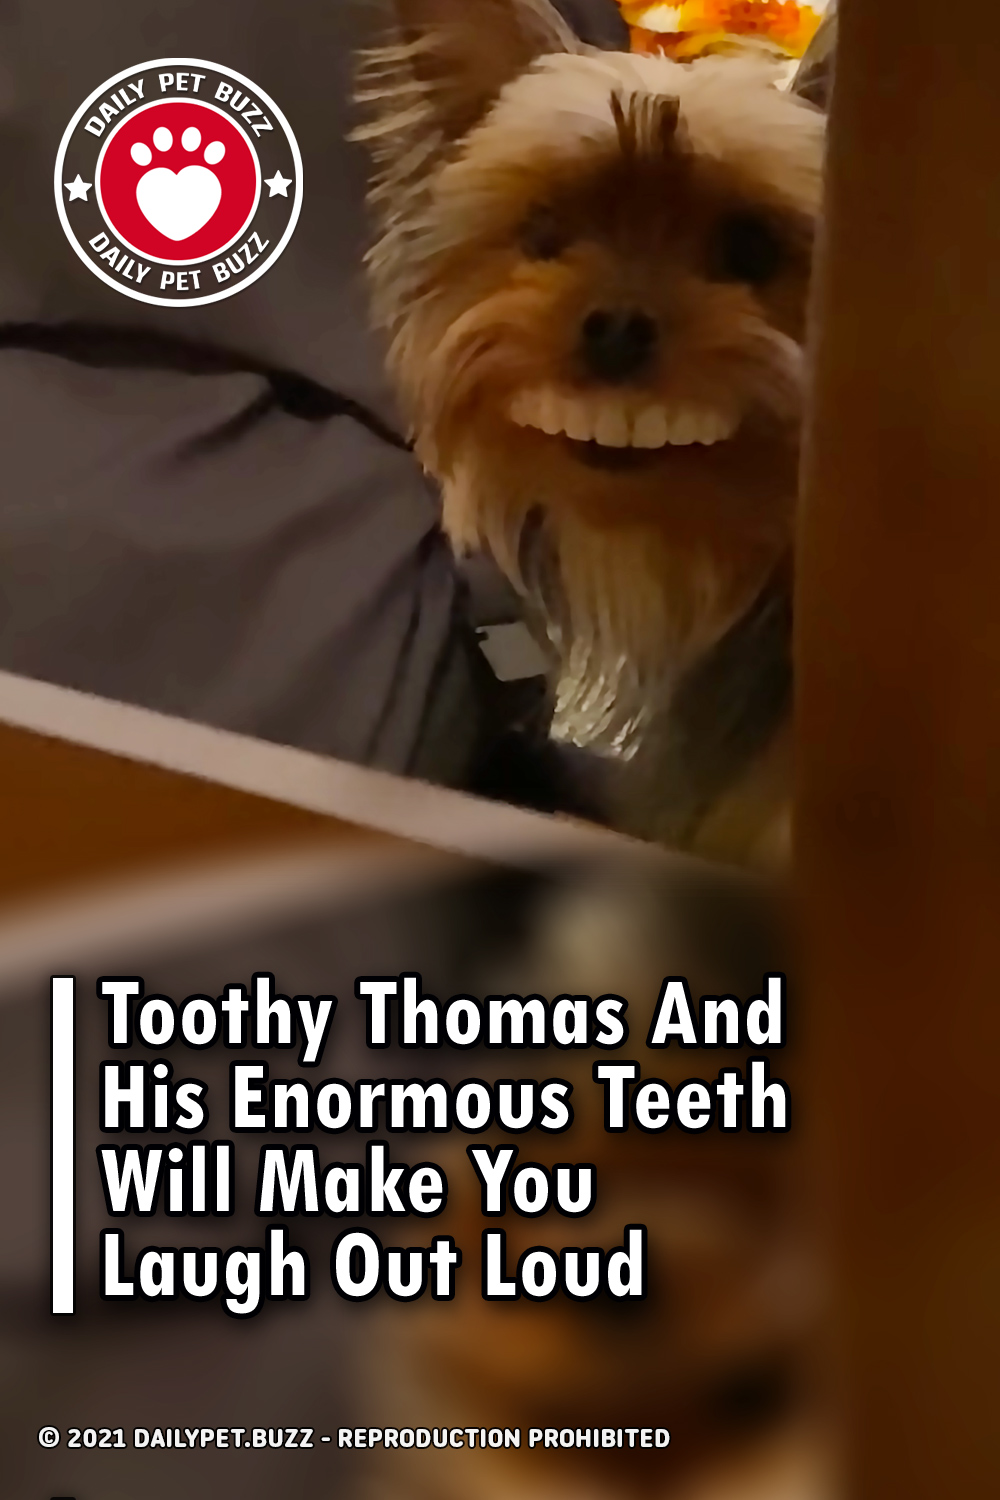 Toothy Thomas And His Enormous Teeth Will Make You Laugh Out Loud